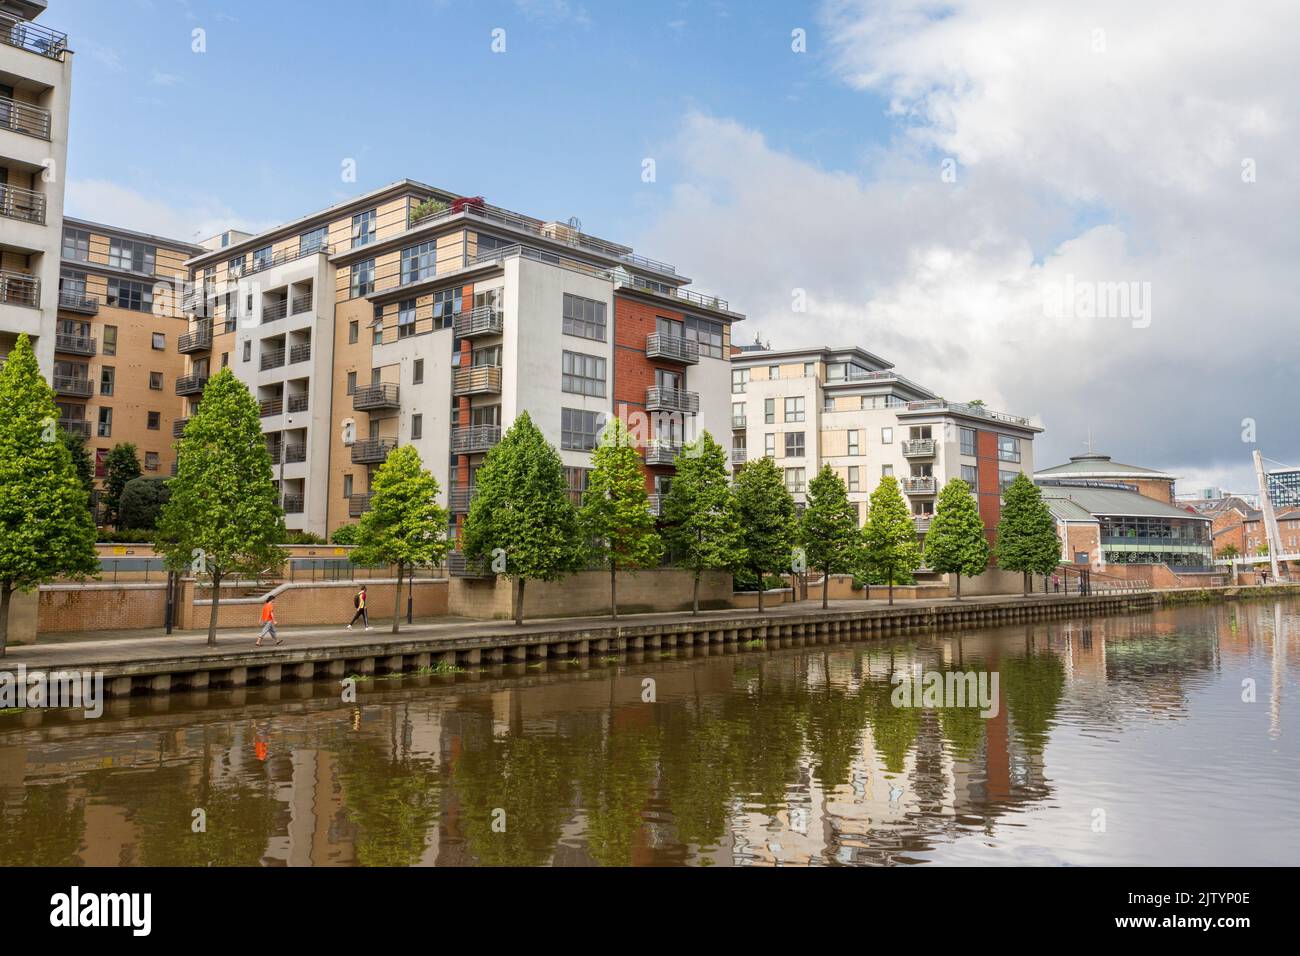 Brewery Wharf, a mixed development with retail, office and leisure facilities by the River Aire, Leeds, West Yorkshire,UK. Stock Photo